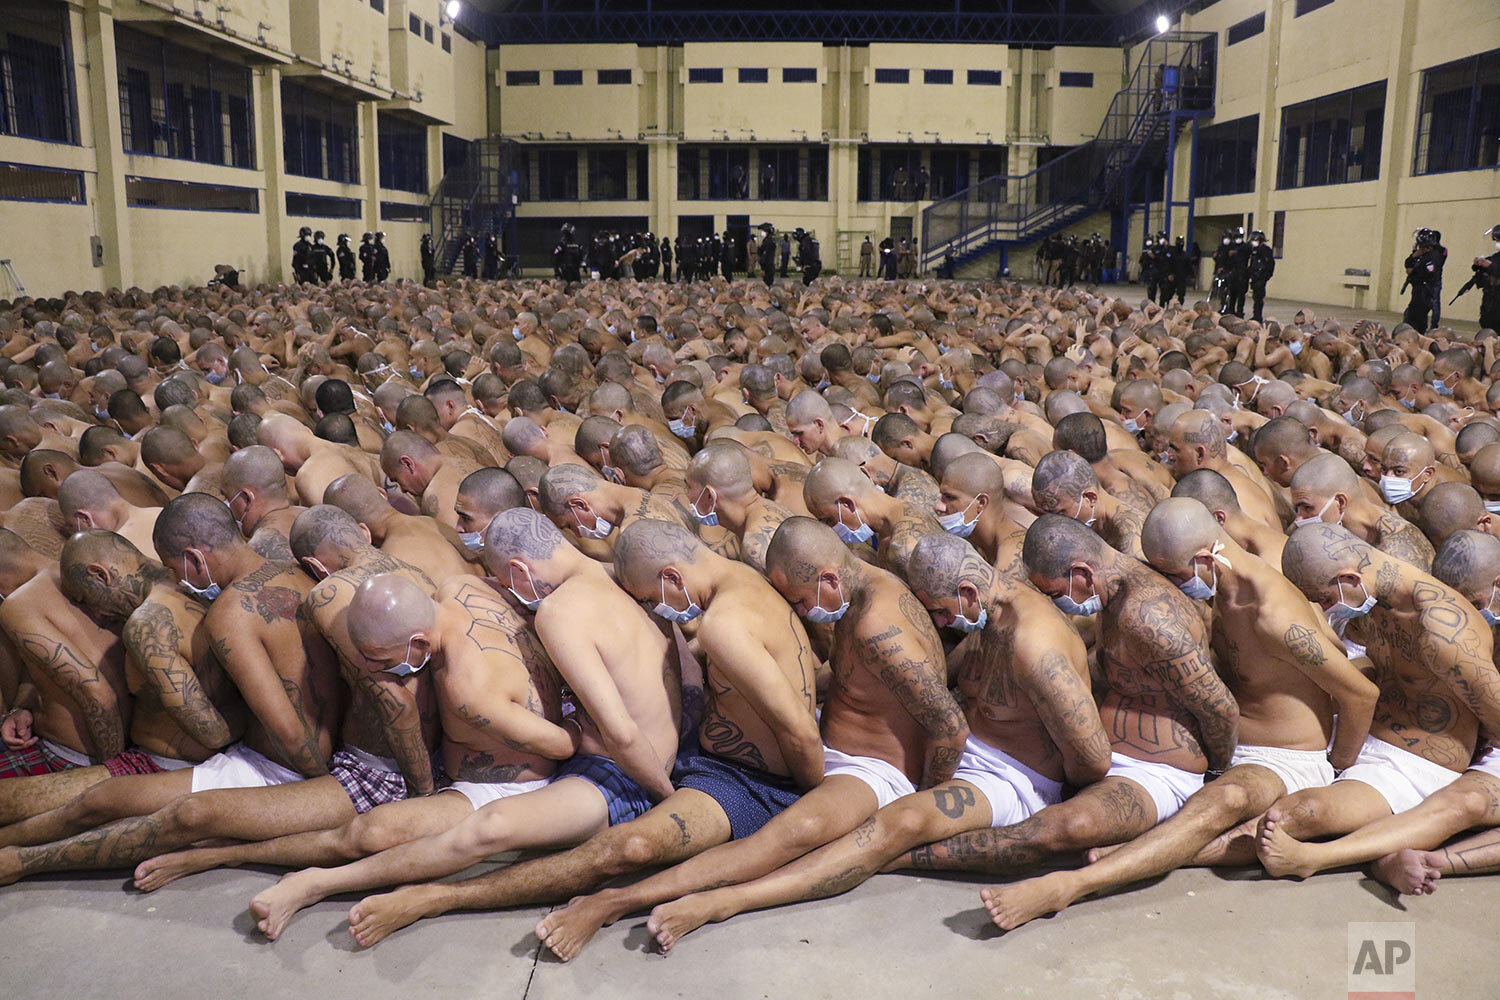  This photo released by the El Salvador presidencial press office shows inmates lined up during a security operation to search their cells, under the watch of police at the Izalco prison in San Salvador, El Salvador, Saturday, April 25, 2020. (El Sal